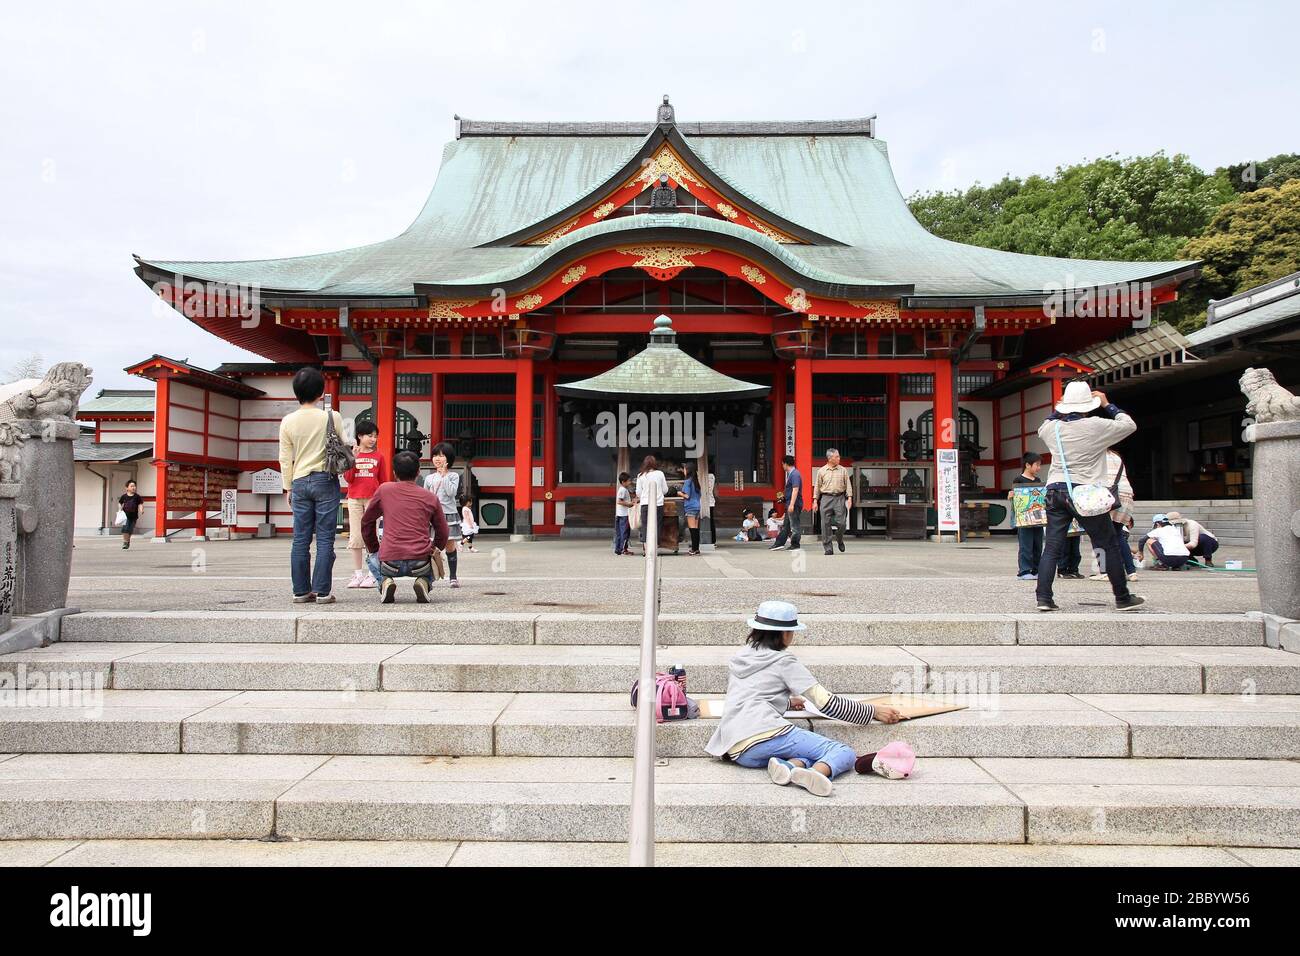 INUYAMA, JAPAN - MAY 3, 2012: People visit Narita-San Temple in Inuyama, Japan. The Shingon sect Buddhist temple was opened in 1953. Stock Photo